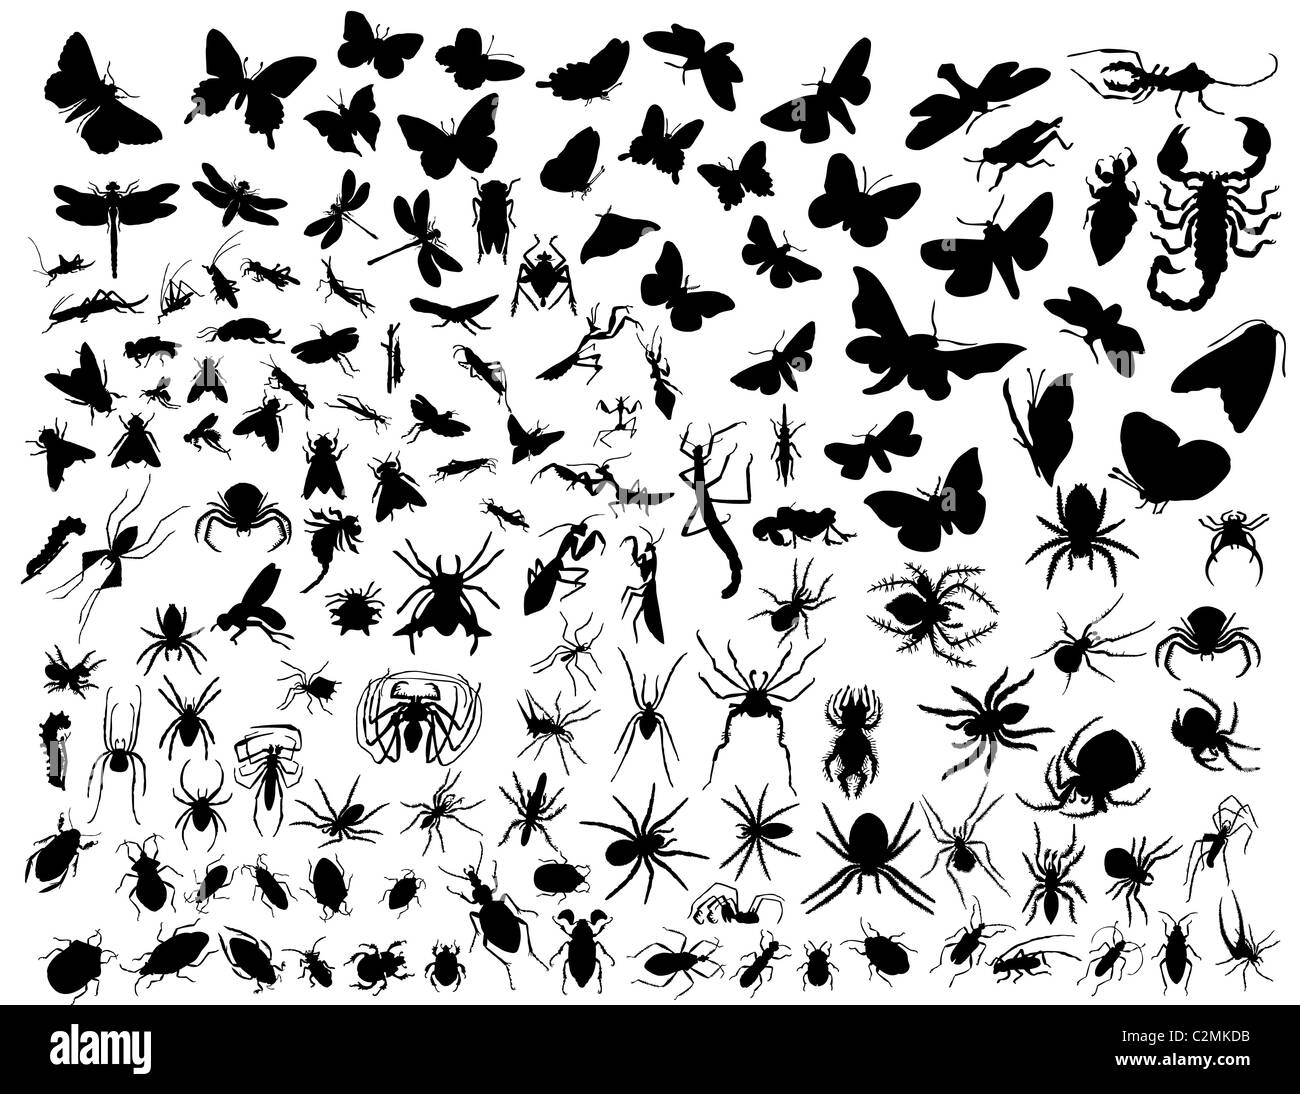 Big collection of different vector insects silhouettes Stock Photo